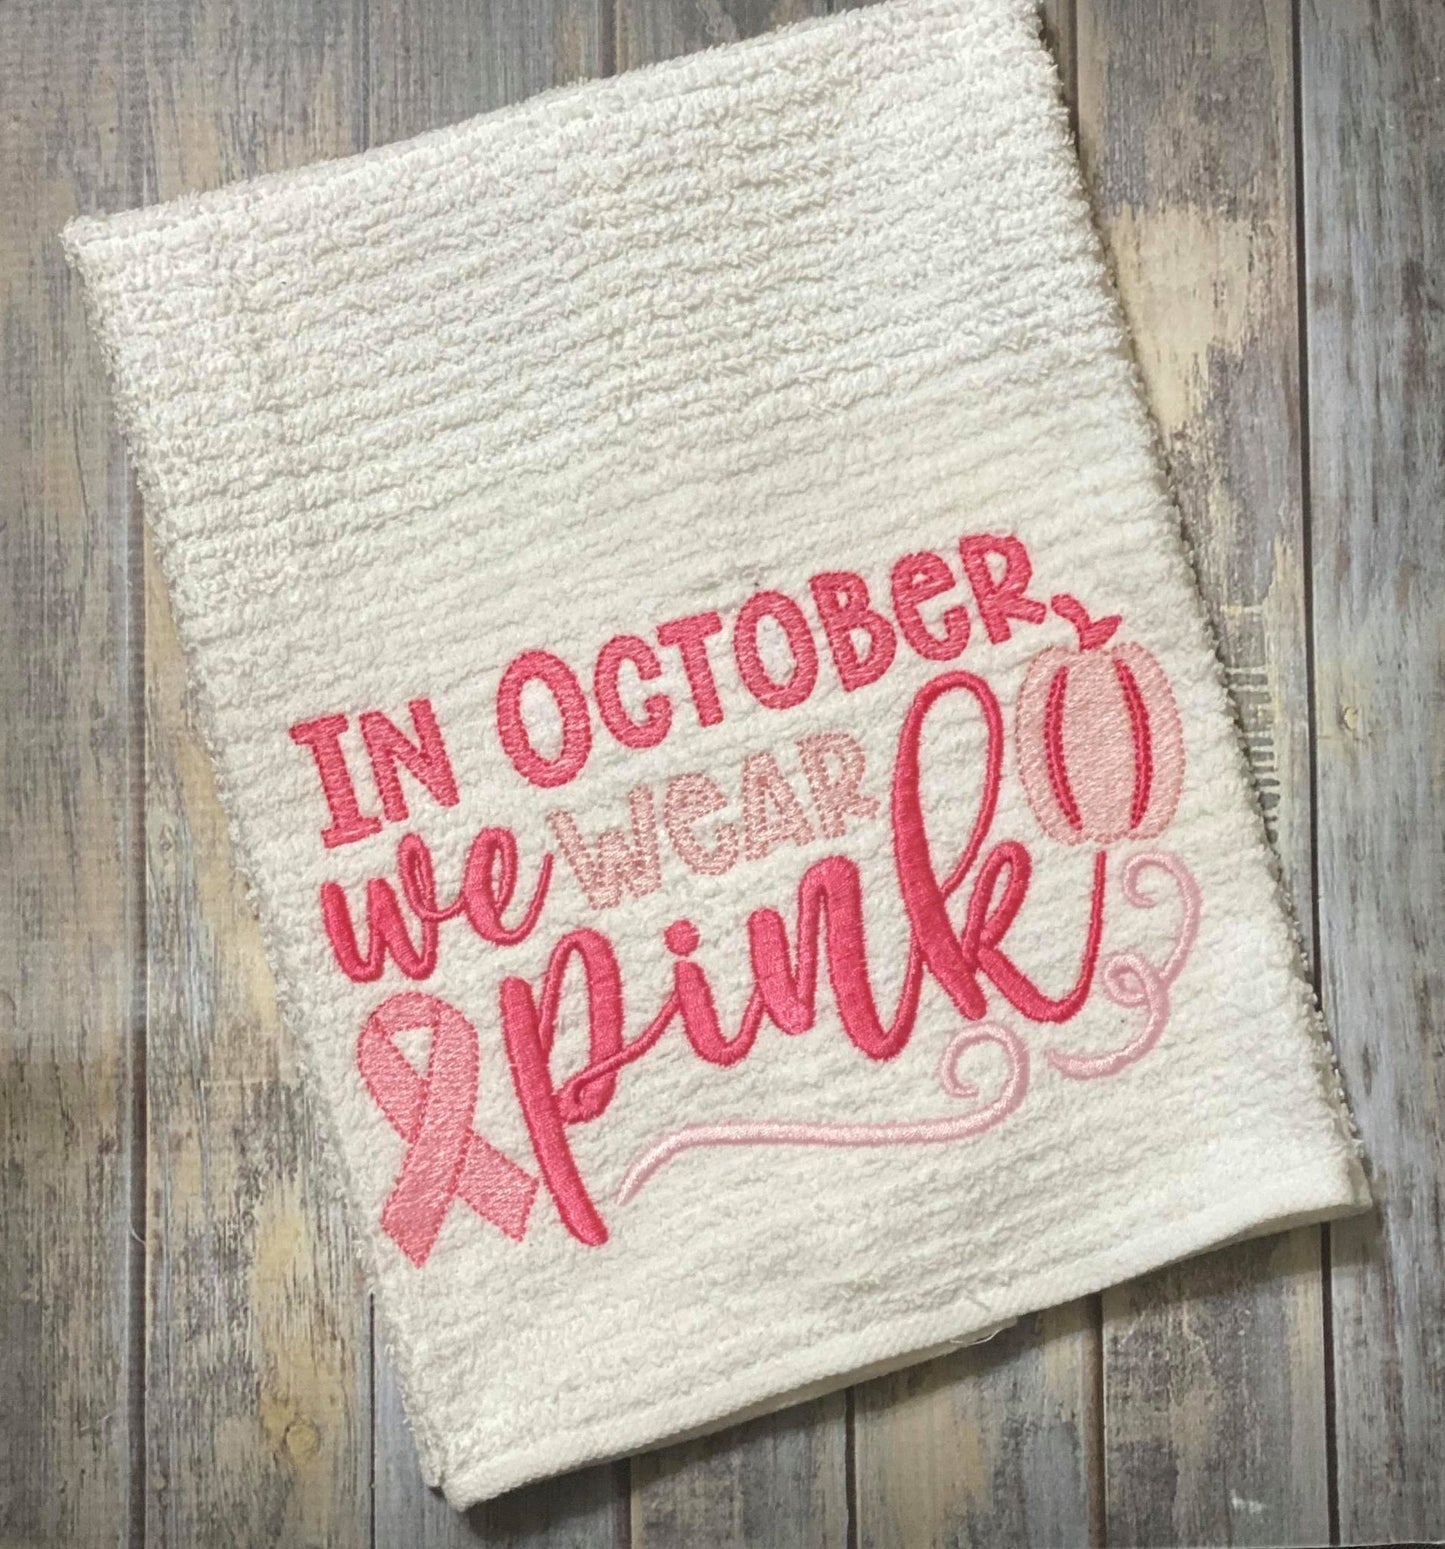 In October We Wear Pink - 3 Sizes - Digital Embroidery Design